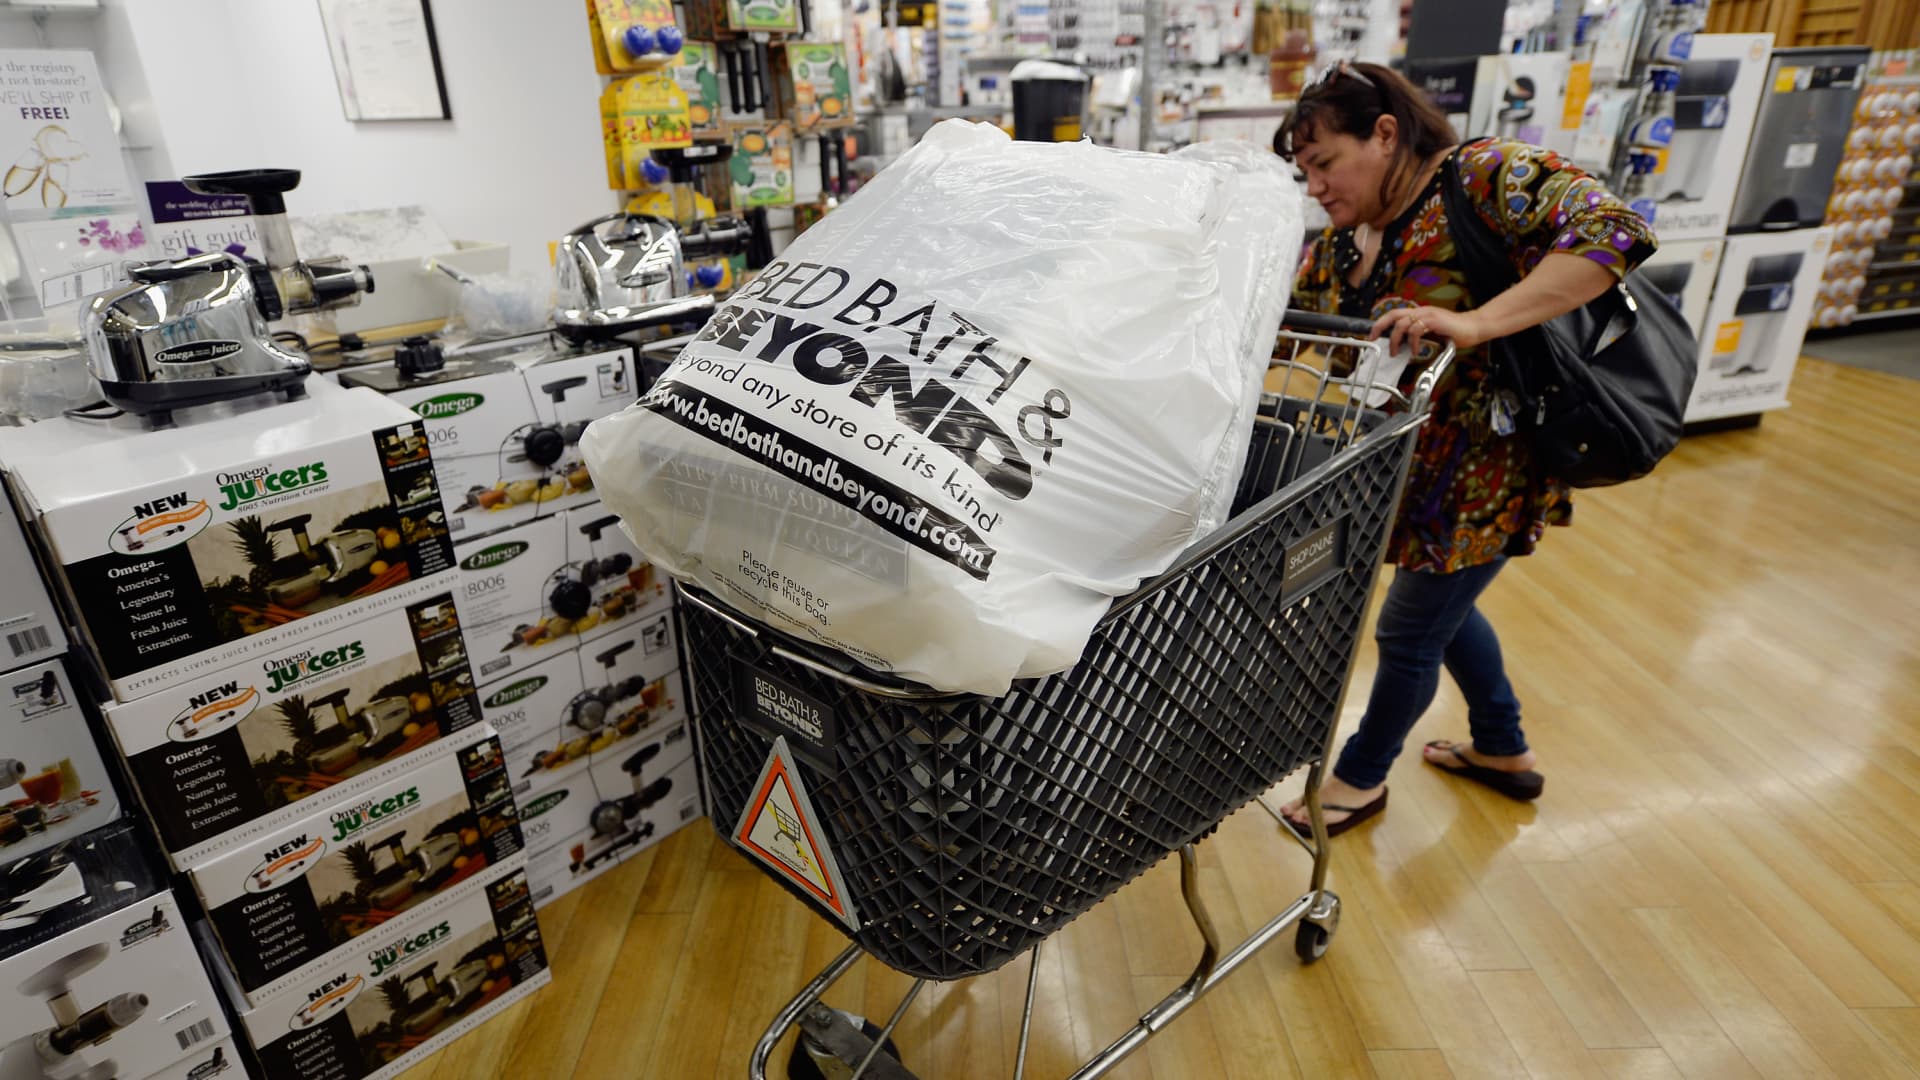 Bed Bath & Beyond shares jump after GameStop chairman reveals big stake, pushes turnaround